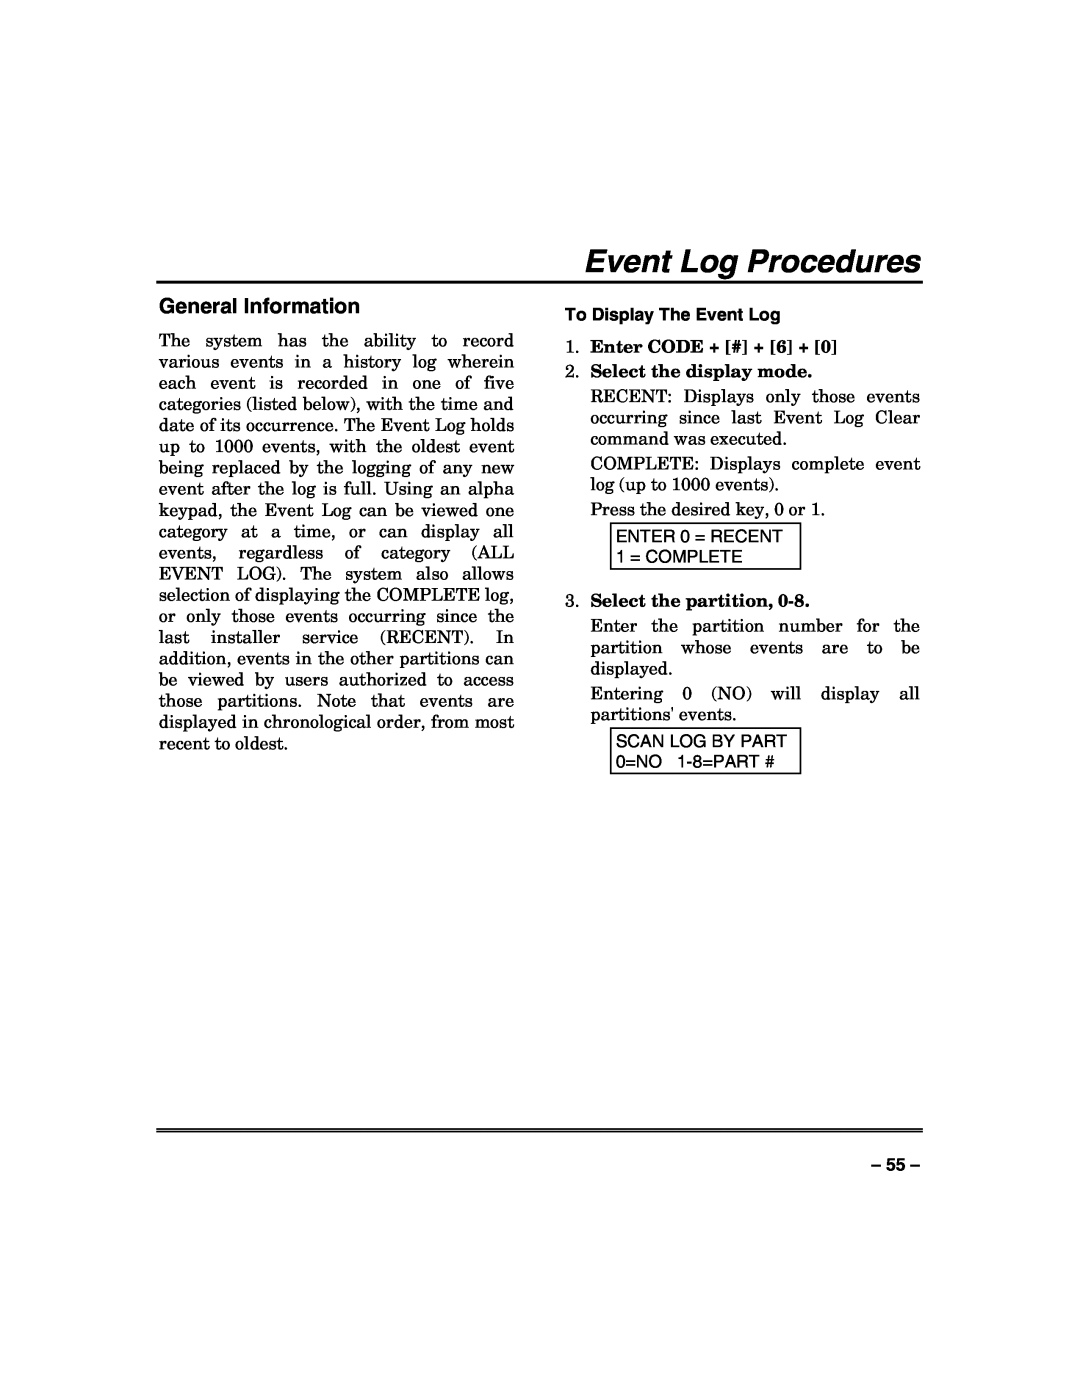 Honeywell VISTA-128FBP manual Event Log Procedures, General Information, To Display The Event Log, Select the partition 